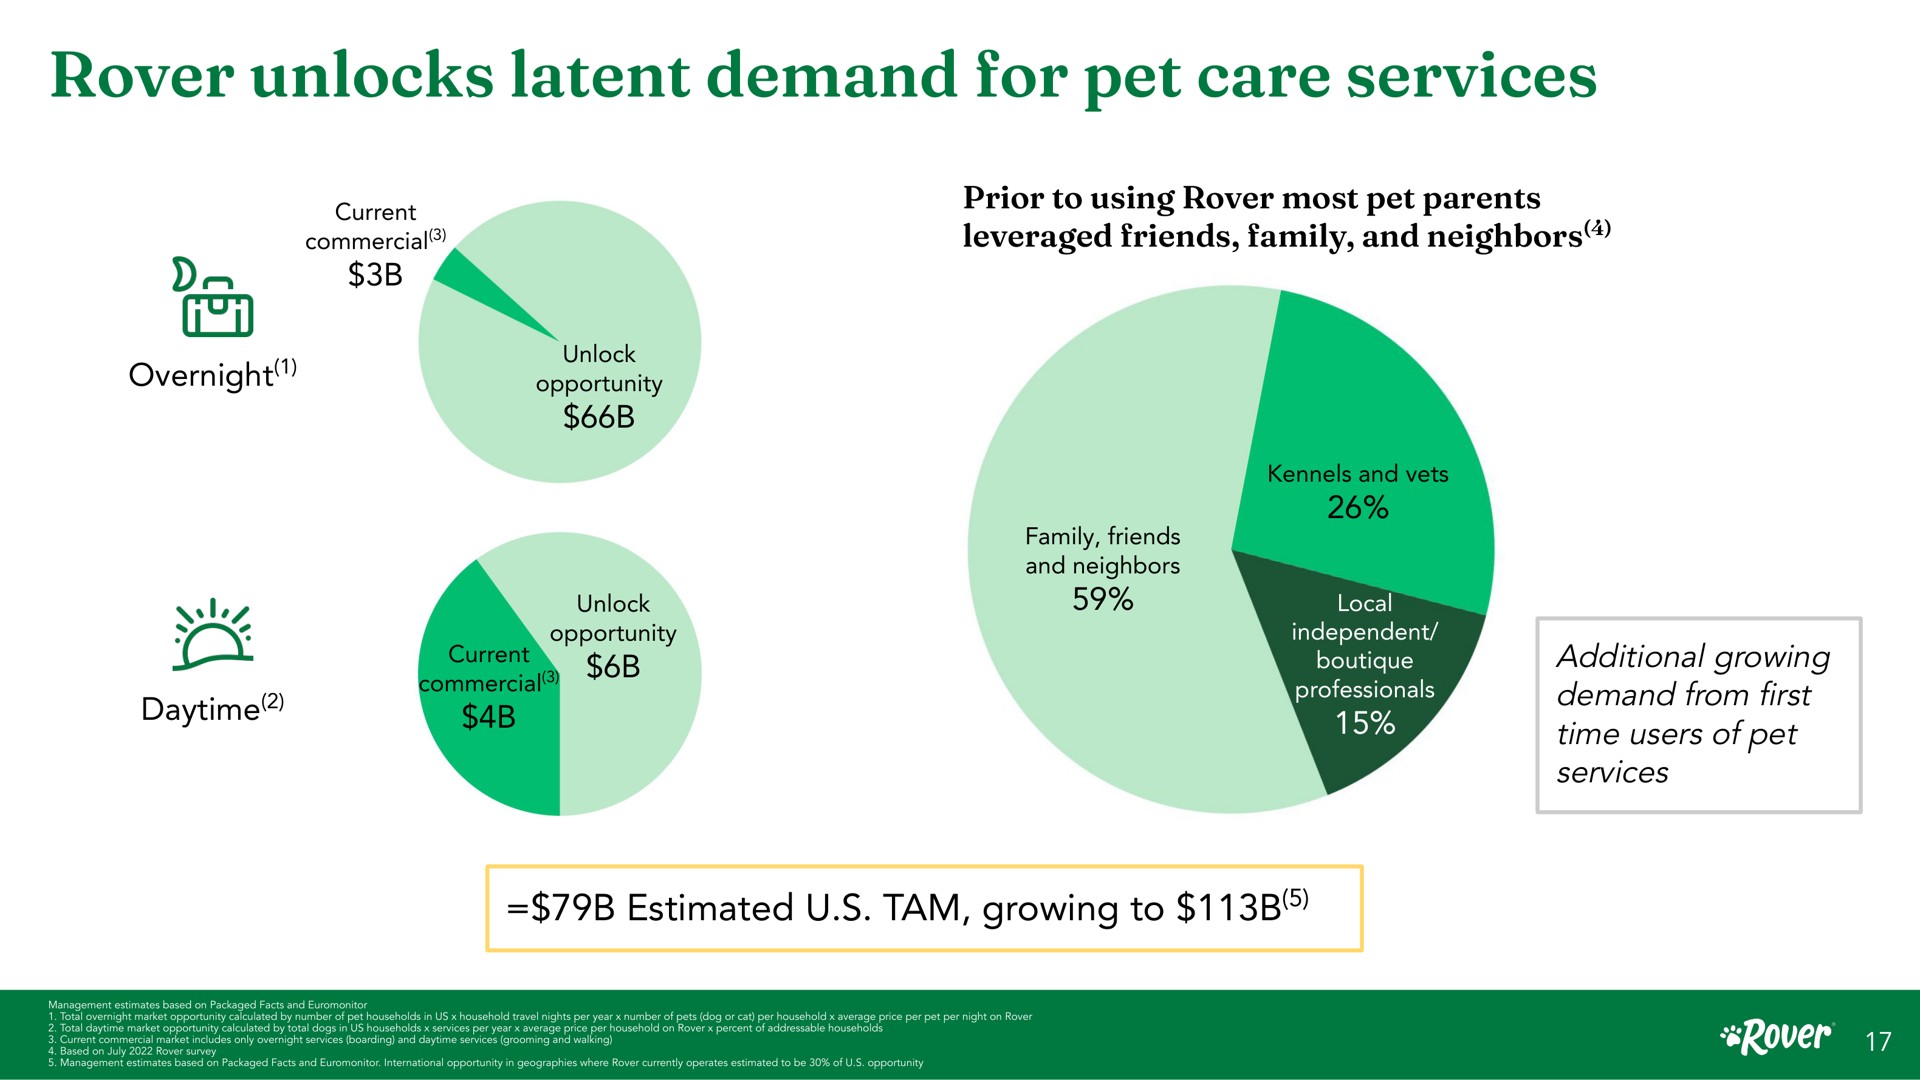 rover unlocks latent demand for pet care services current commercial overnight elegy daytime unlock opportunity unlock opportunity prior to using most parents leveraged friends family and neighbors family friends and neighbors local independent additional growing from first time users of estimated tam growing to | Rover